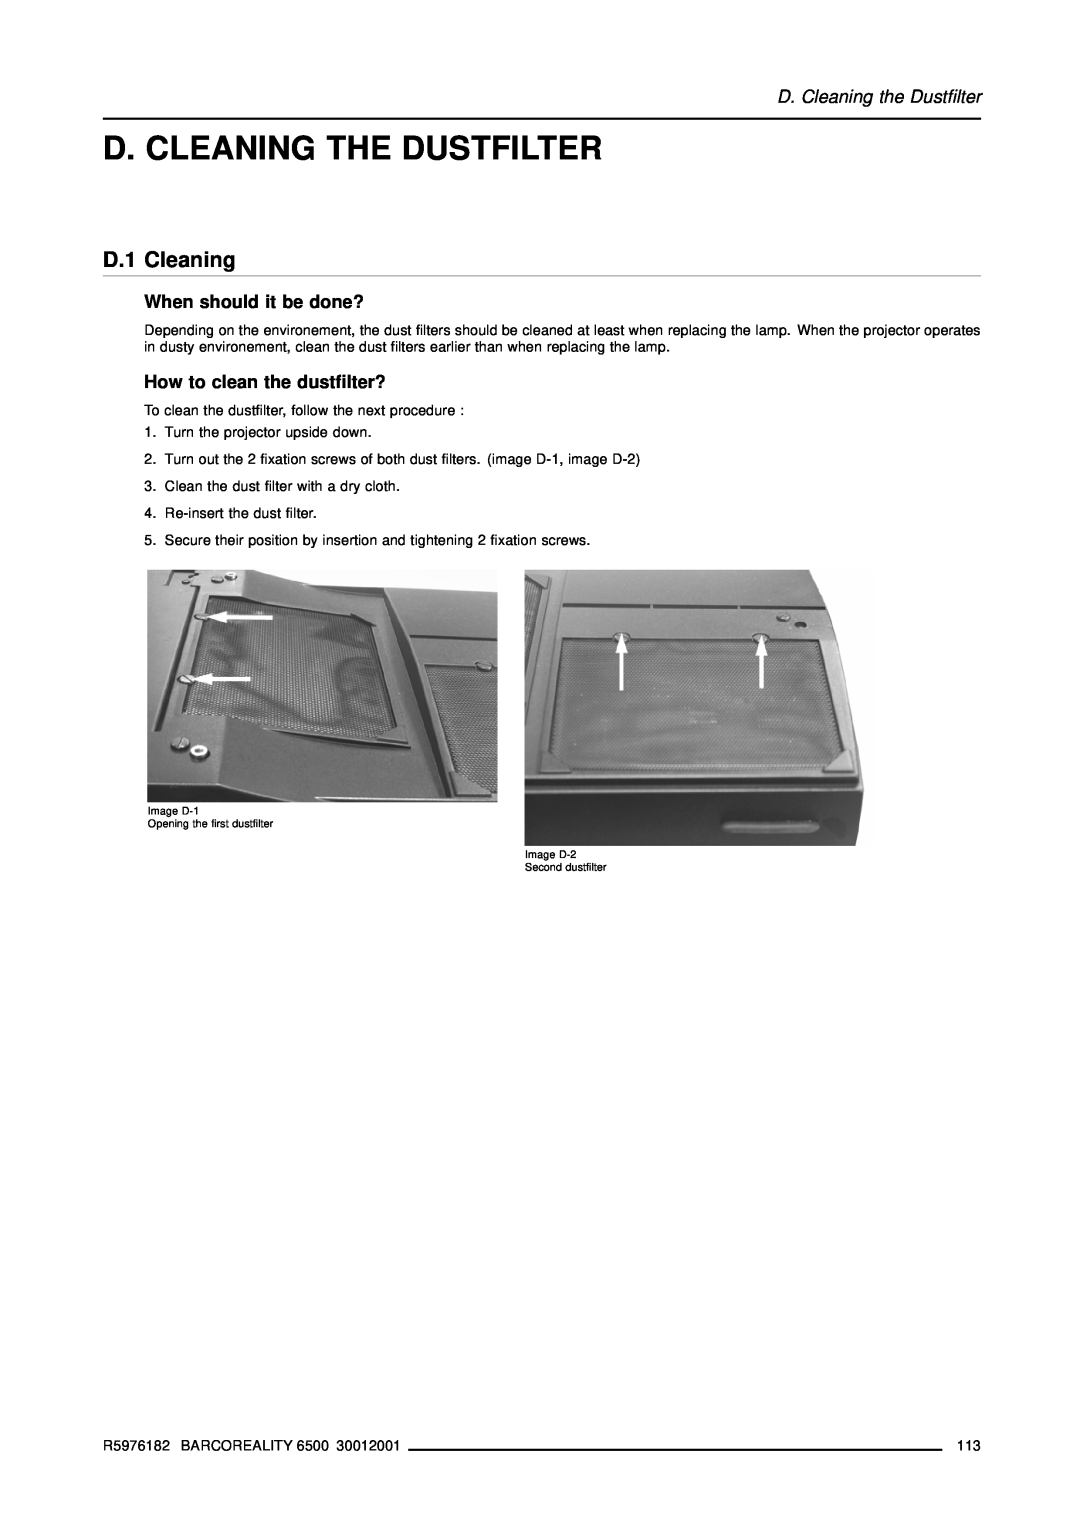 Barco R9001960 owner manual D. Cleaning The Dustfilter, D.1 Cleaning, D. Cleaning the Dustfilter, When should it be done? 